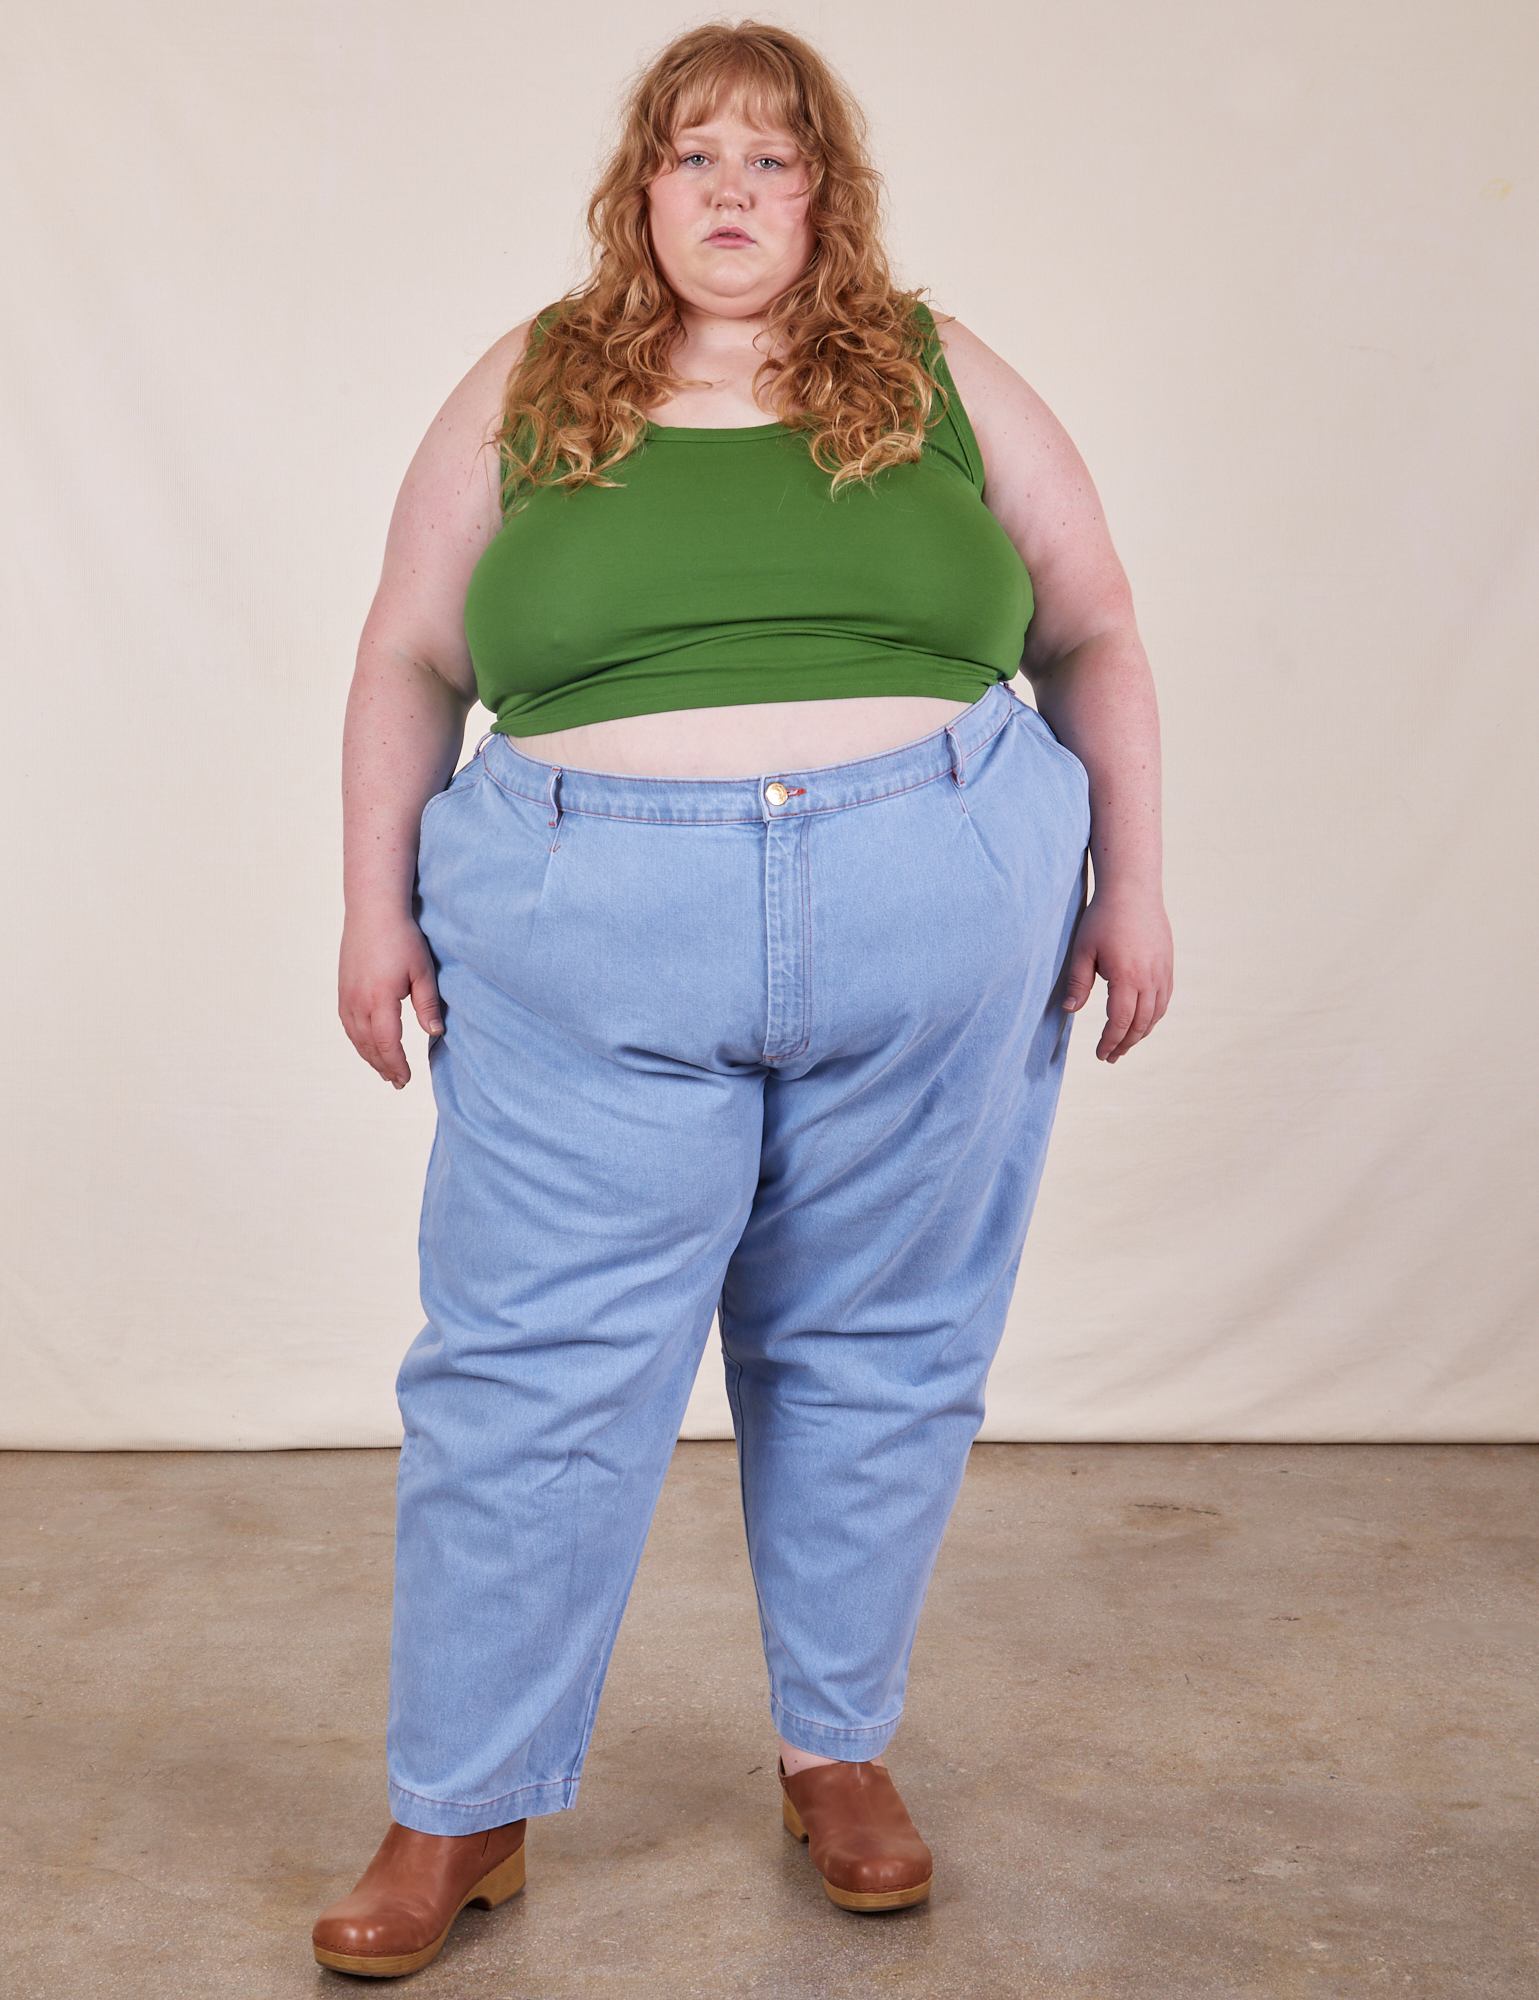 Catie is wearing Cropped Tank Top in Lawn Green and light wash Trouser Jeans